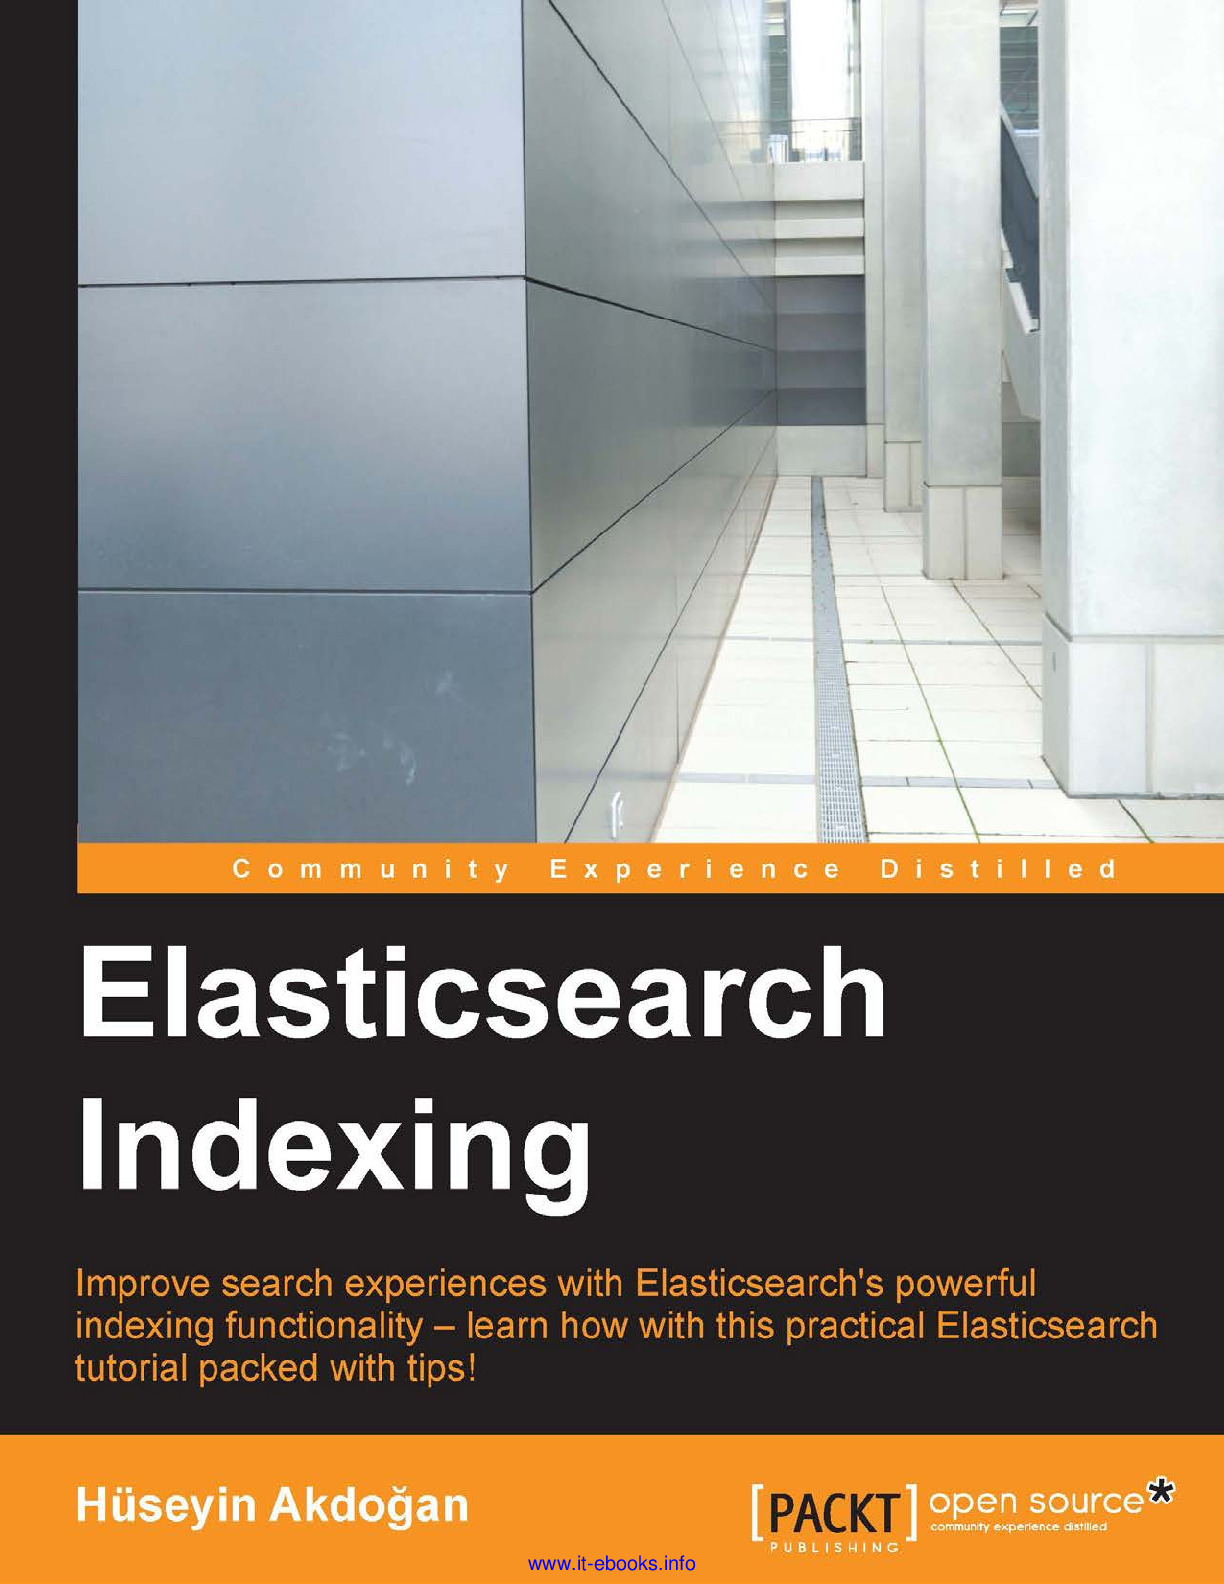 Elasticsearch Indexing – Improve search experiences with Elasticsearch’s powerful indexing functionality